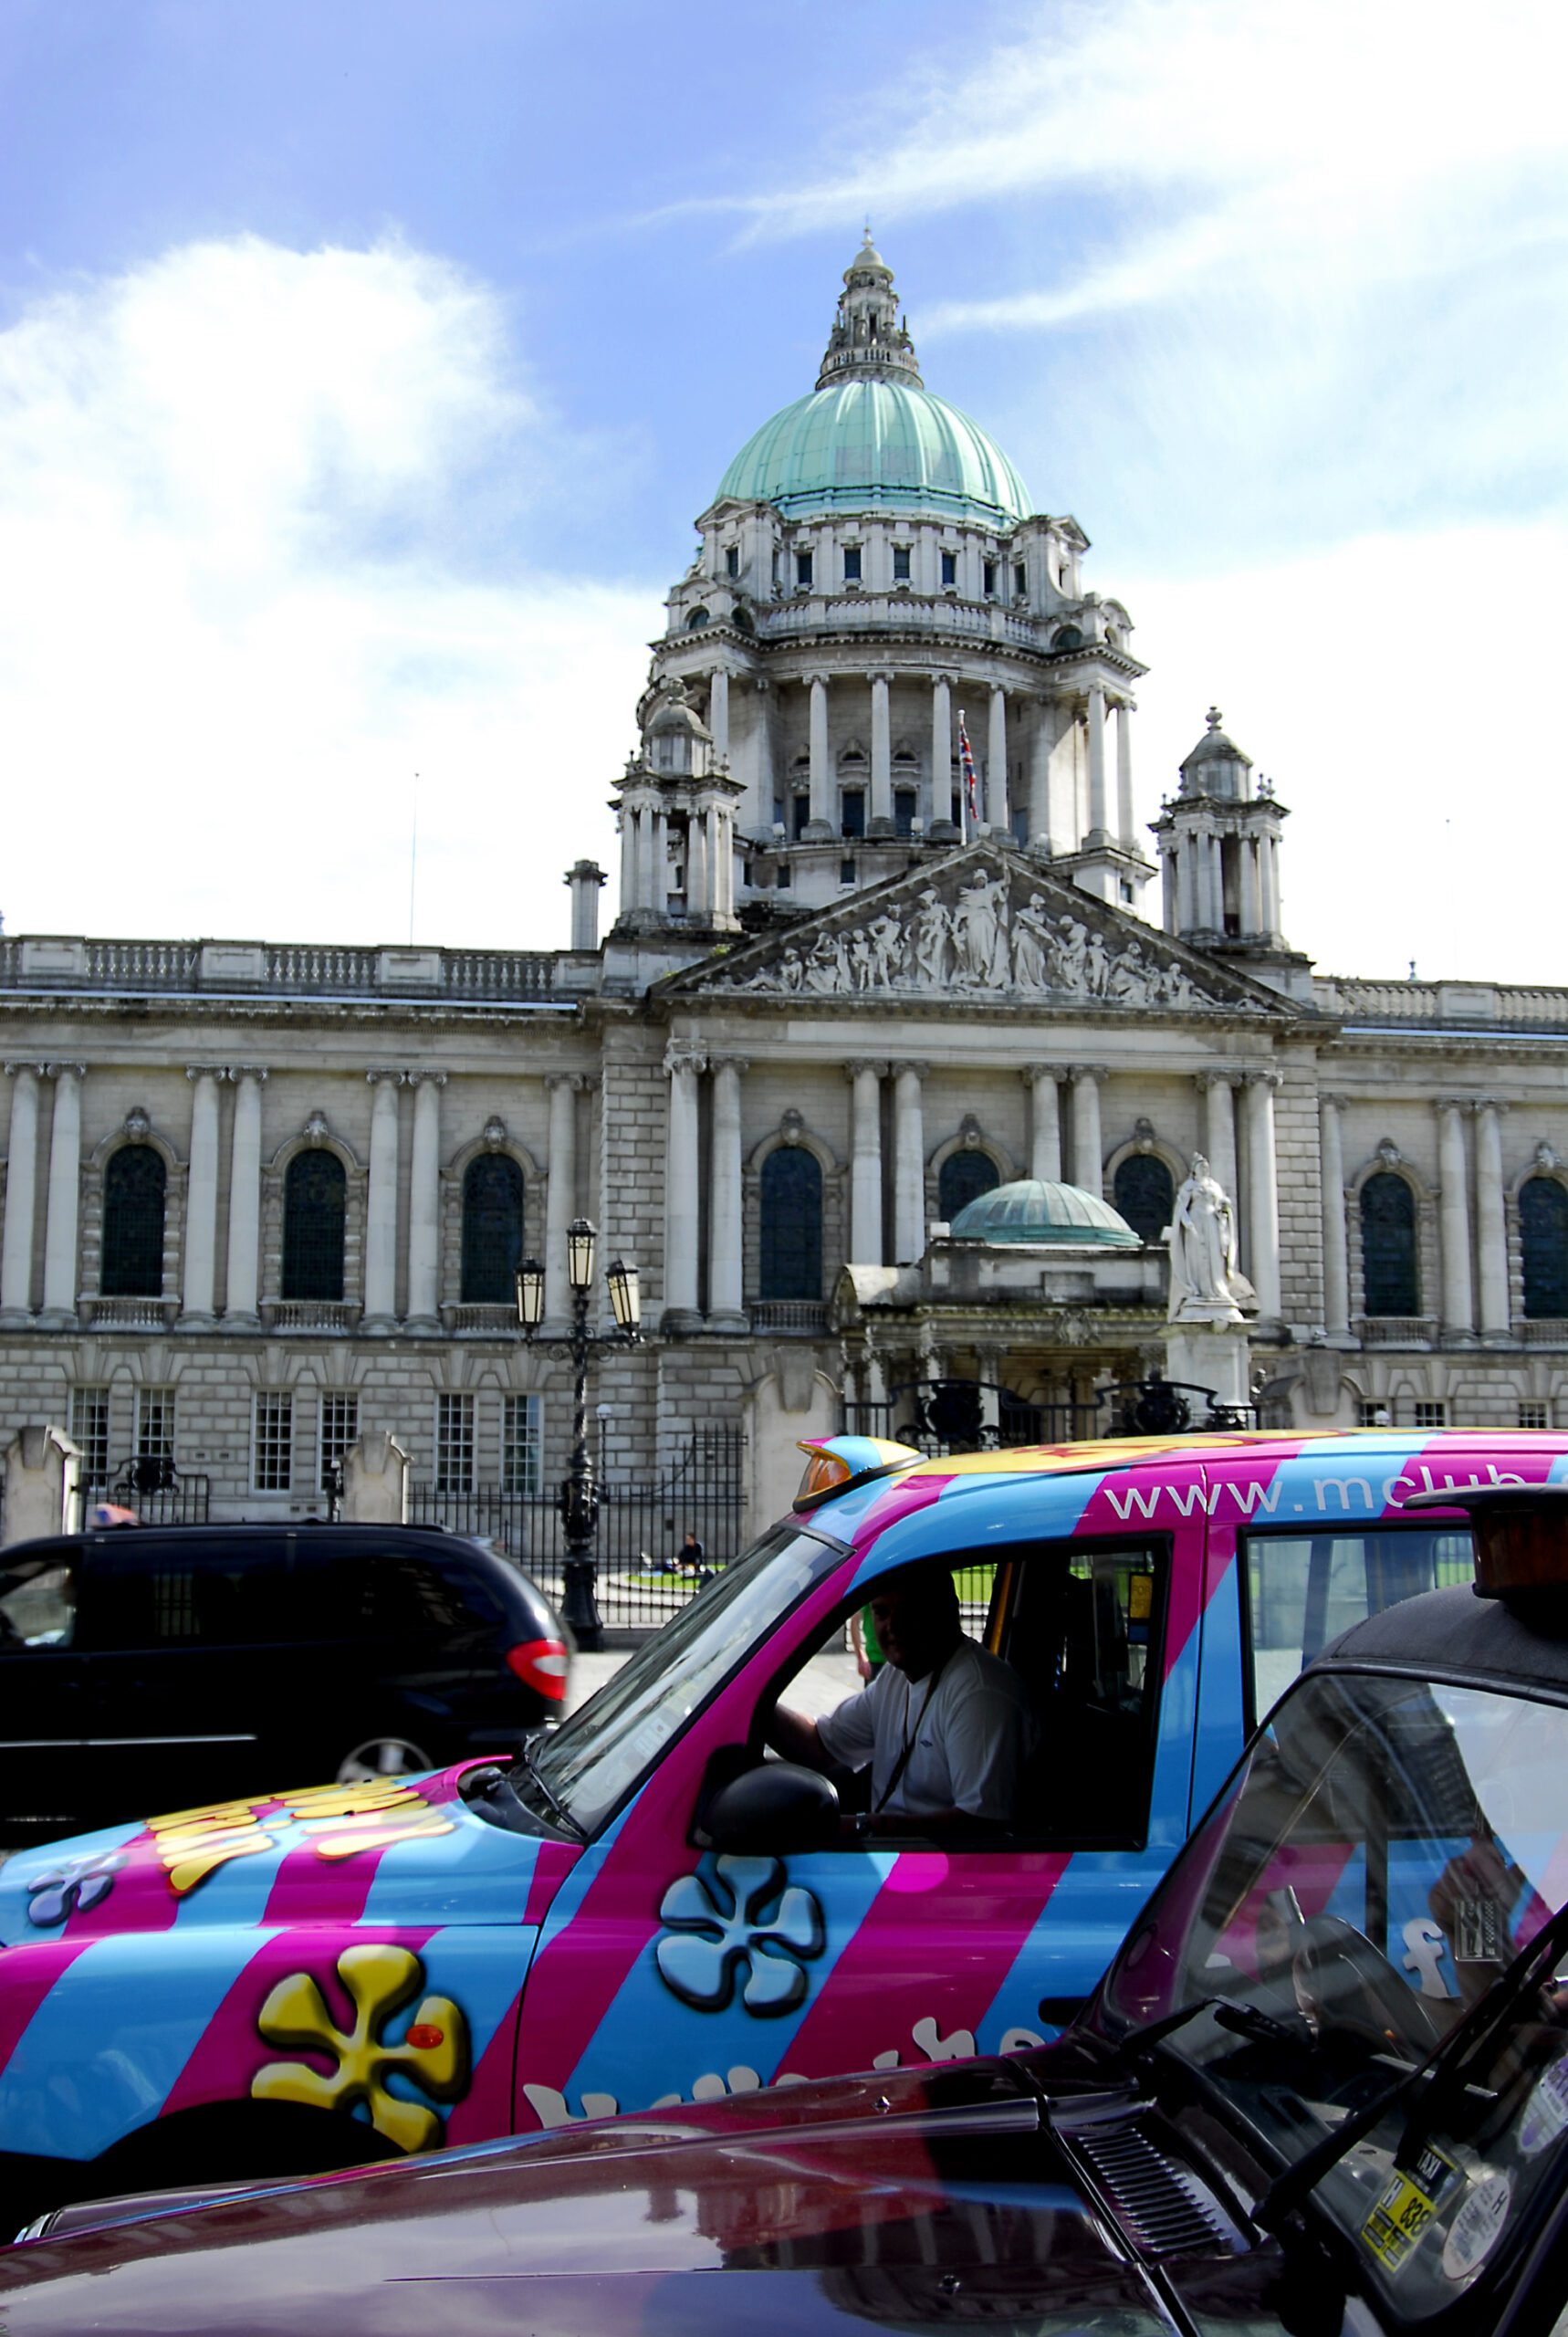 Life in Belfast: Black taxi tours are a great way to get to know the city.